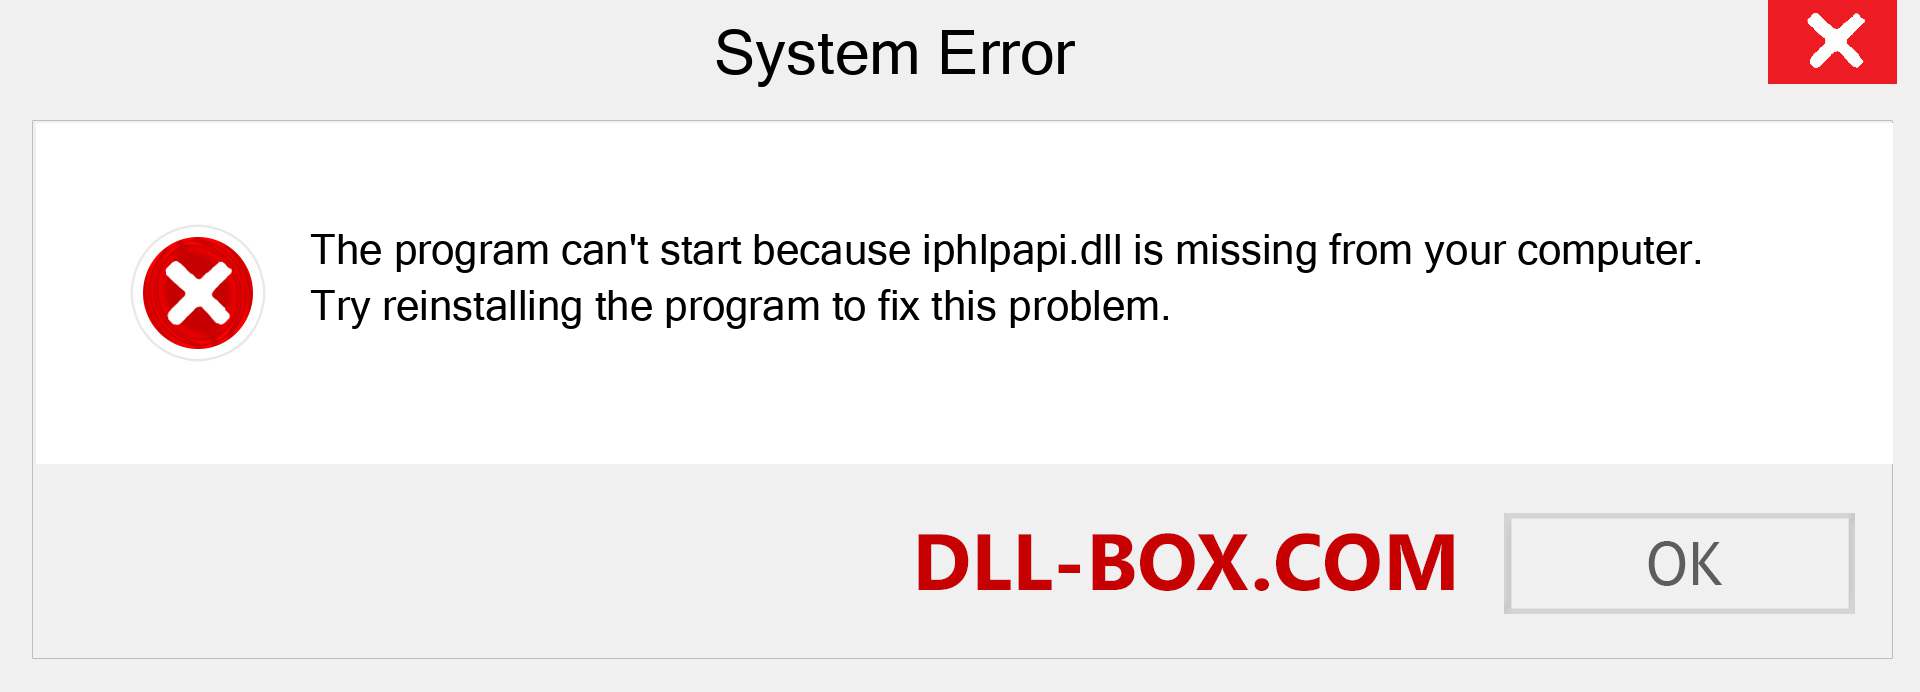  iphlpapi.dll file is missing?. Download for Windows 7, 8, 10 - Fix  iphlpapi dll Missing Error on Windows, photos, images